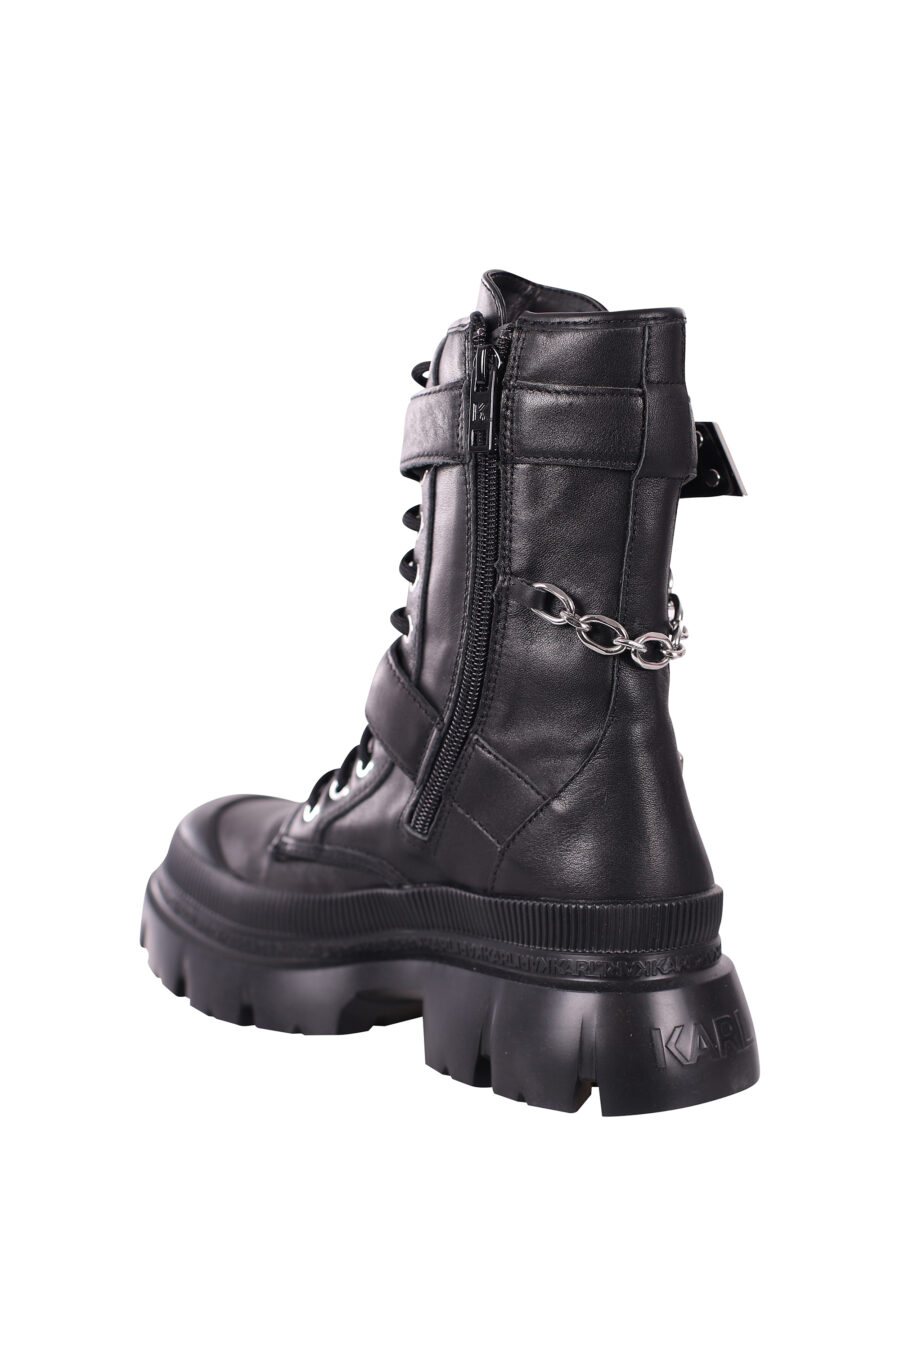 Black ankle boots with chain and silver buckle - IMG 5734